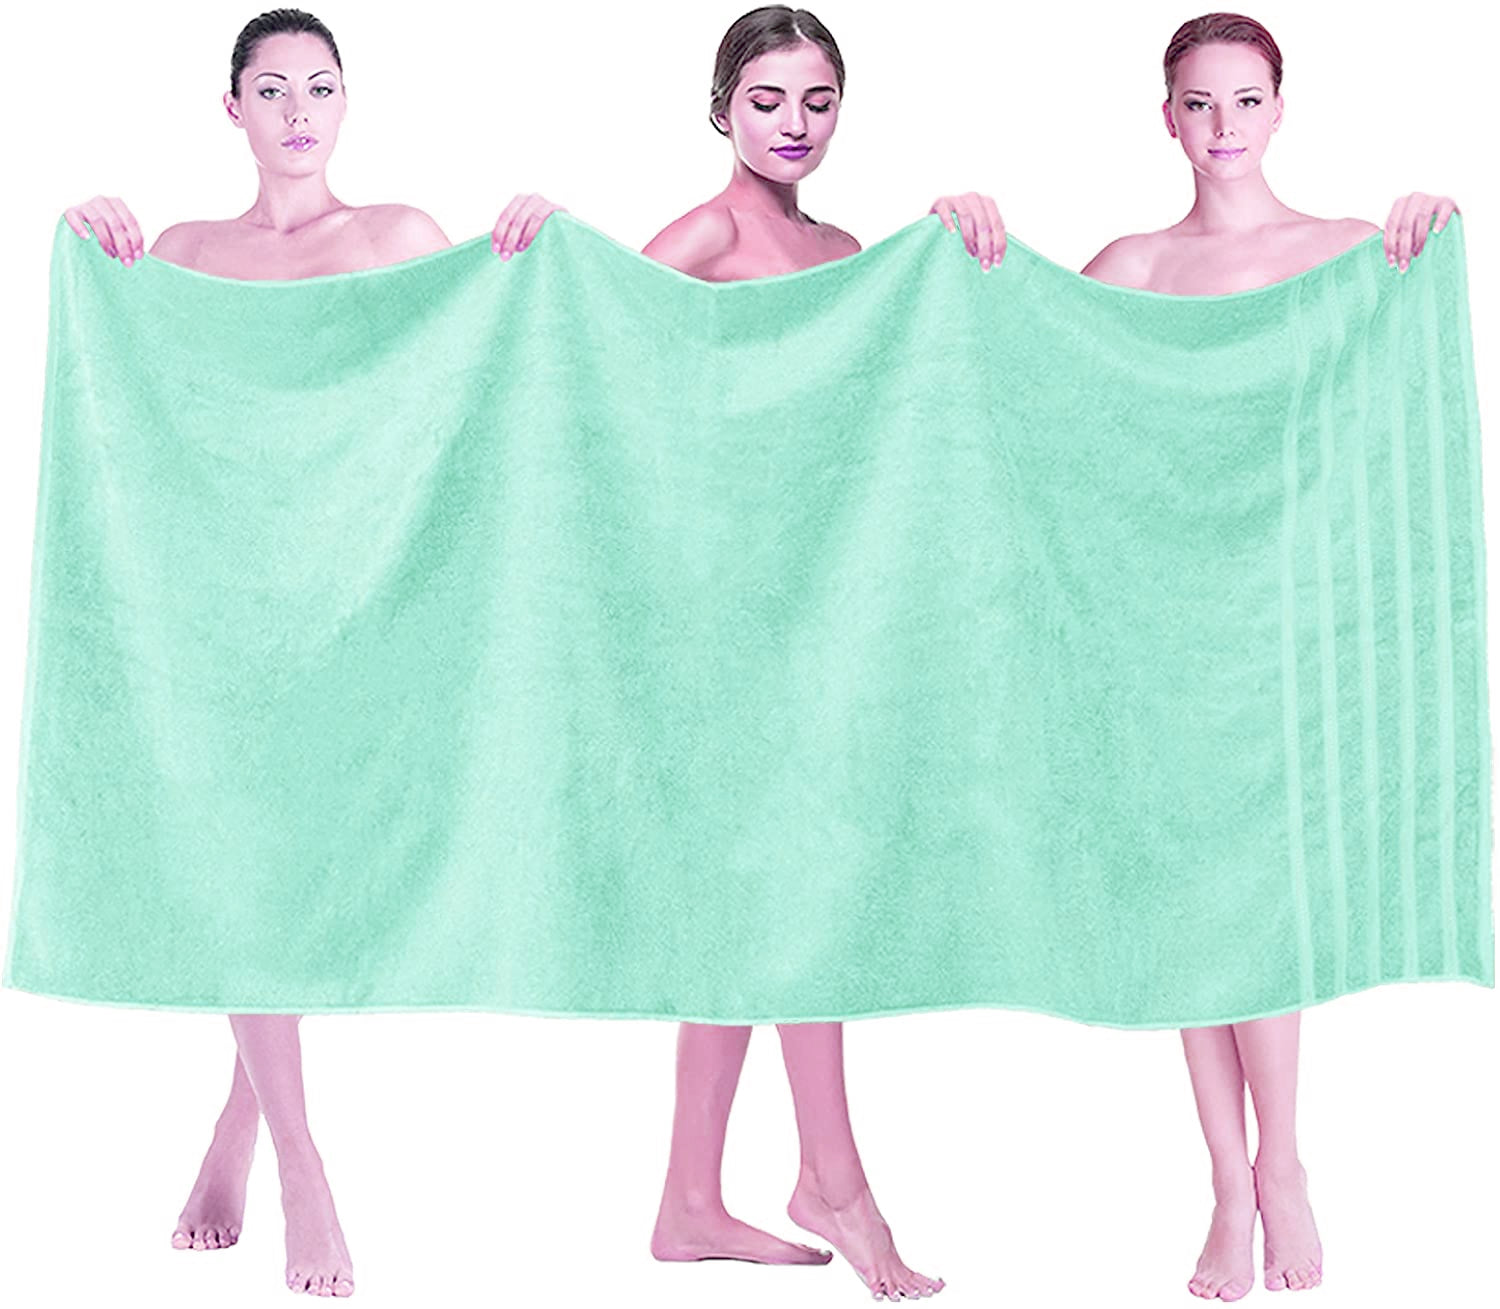 Plush XL Natural Egyptian Cotton Bath Towels with a super 600 GSM count